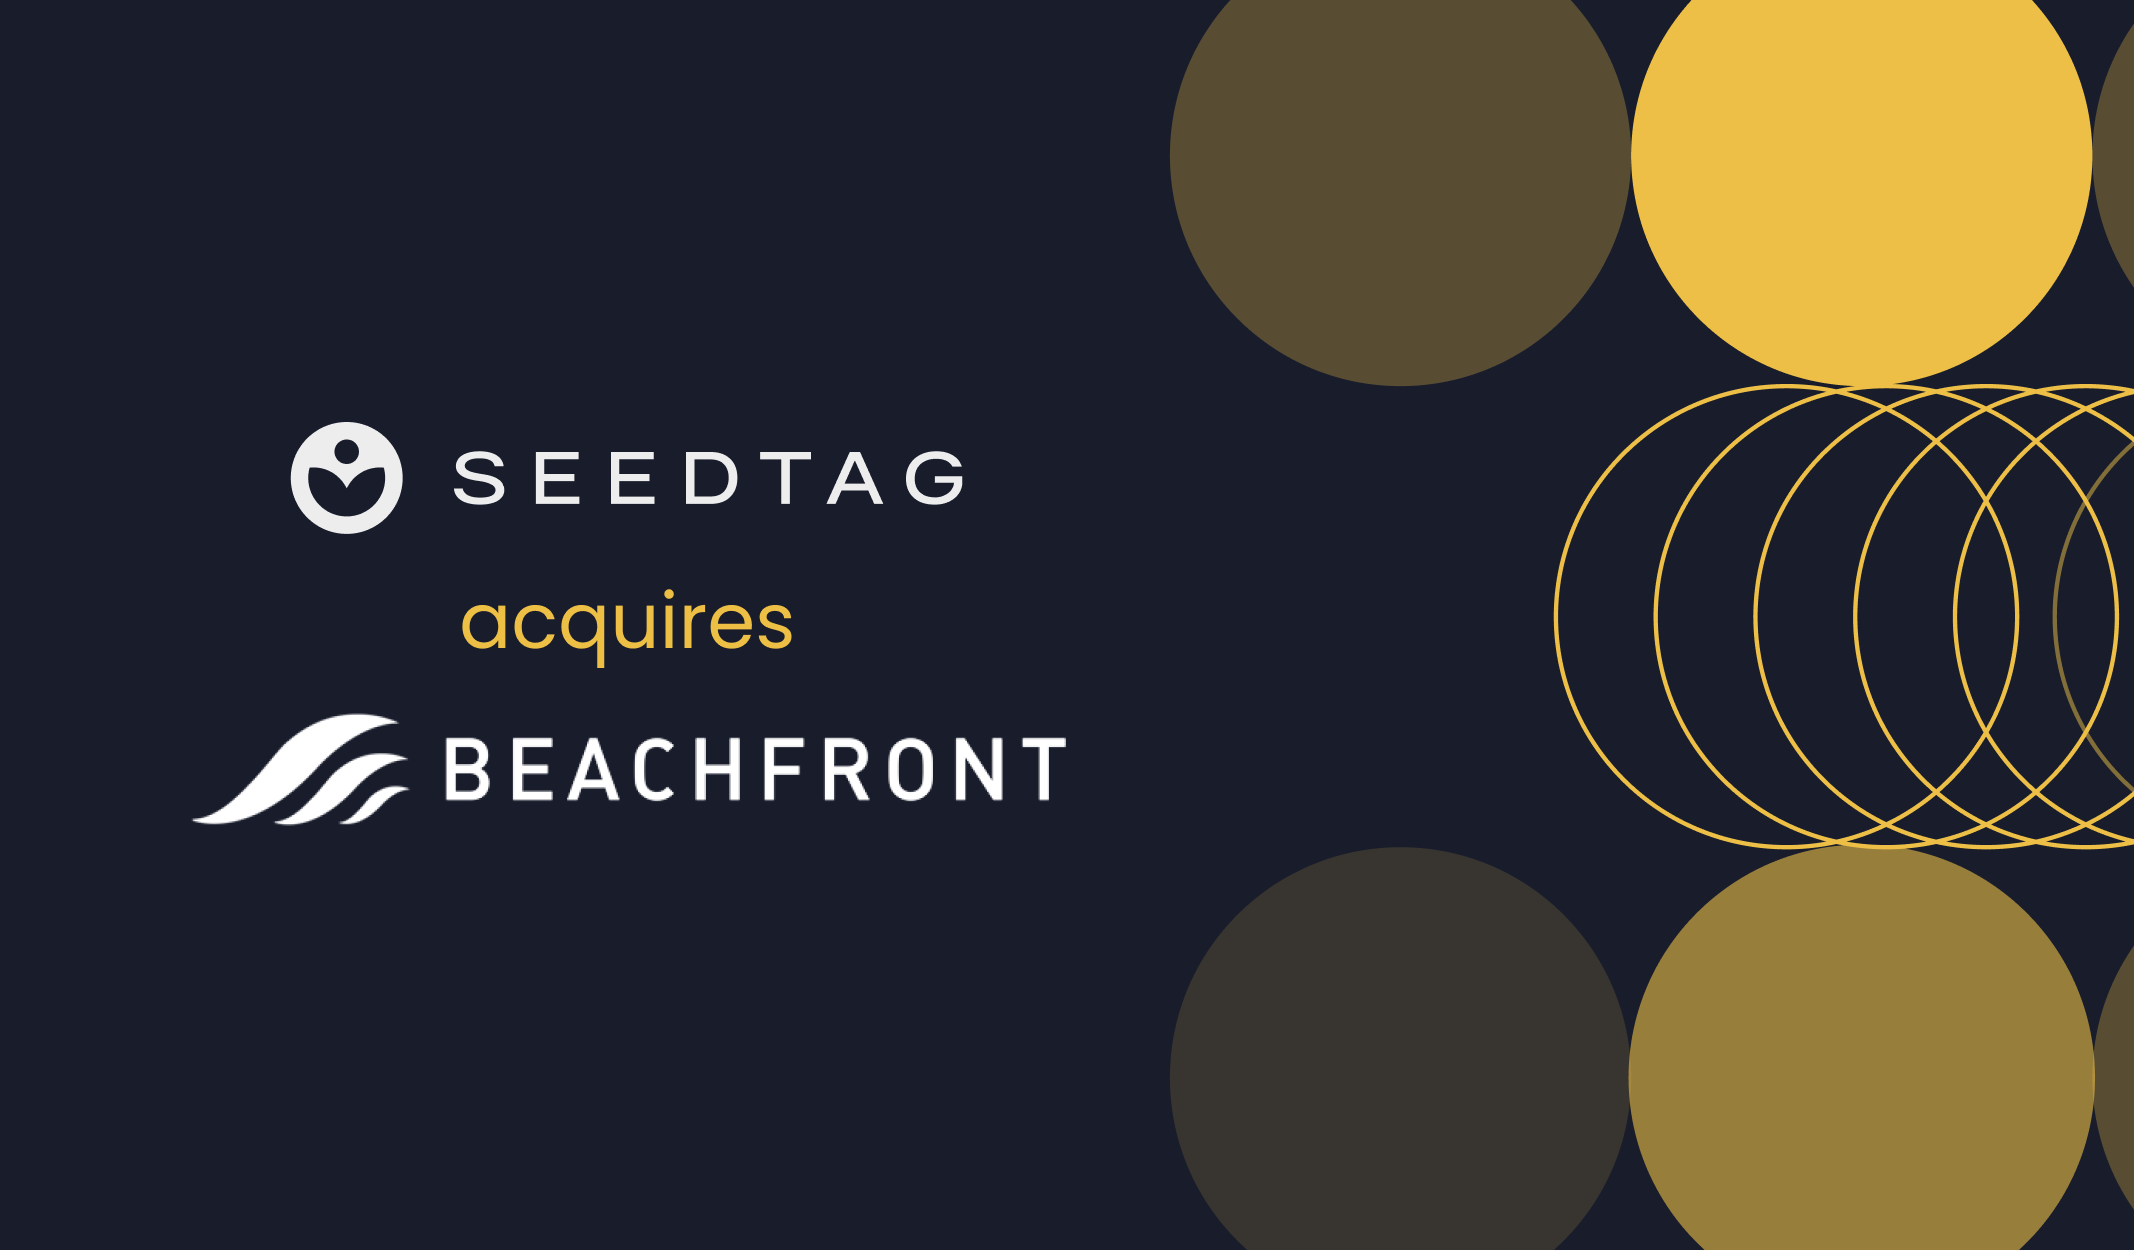 Seedtag is ready to push the boundaries of CTV advertising with Beachfront acquisition